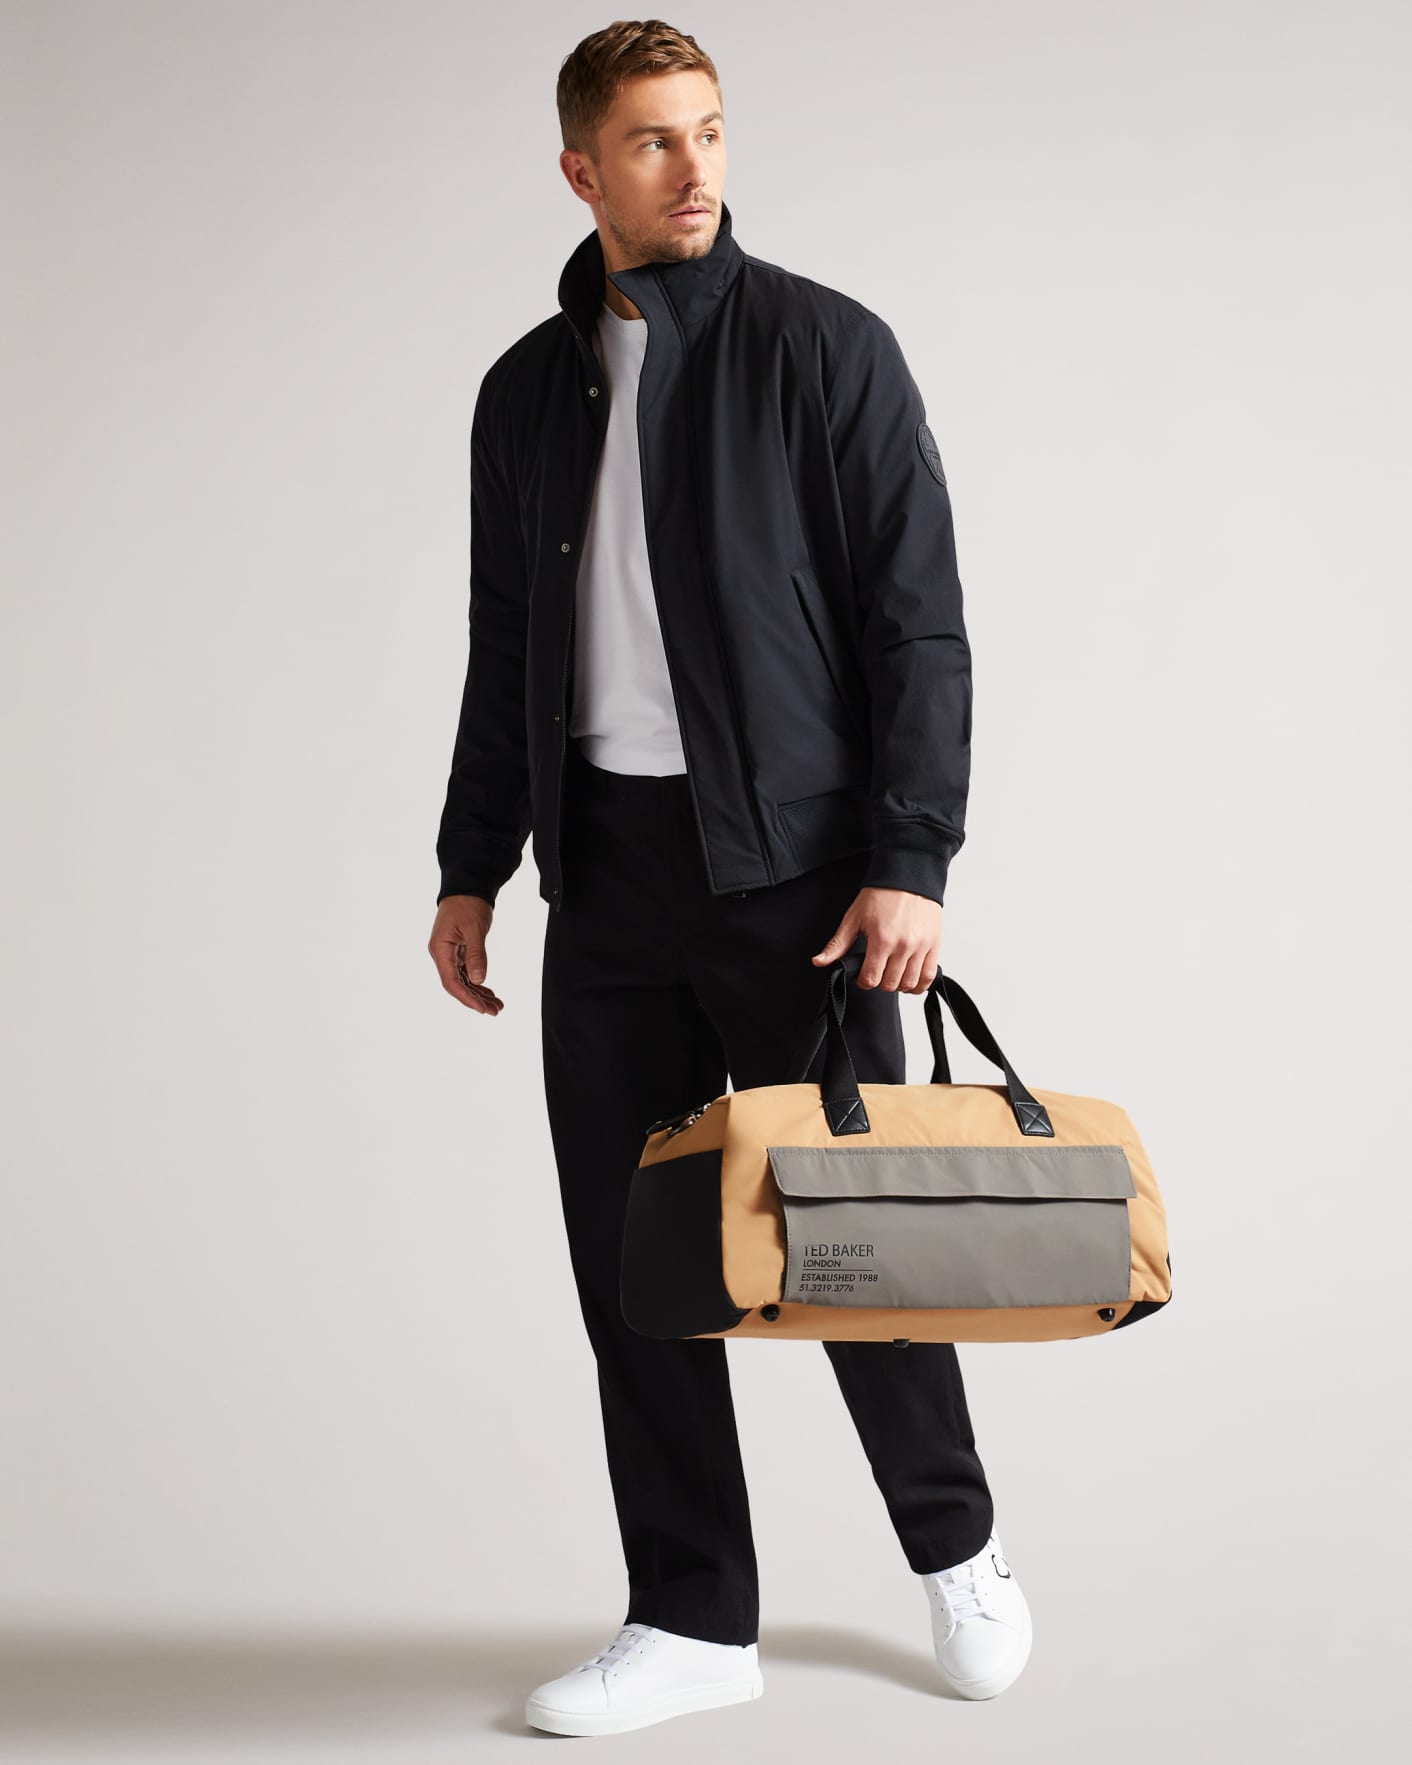 Tan Colour Block Holdall Ted Baker